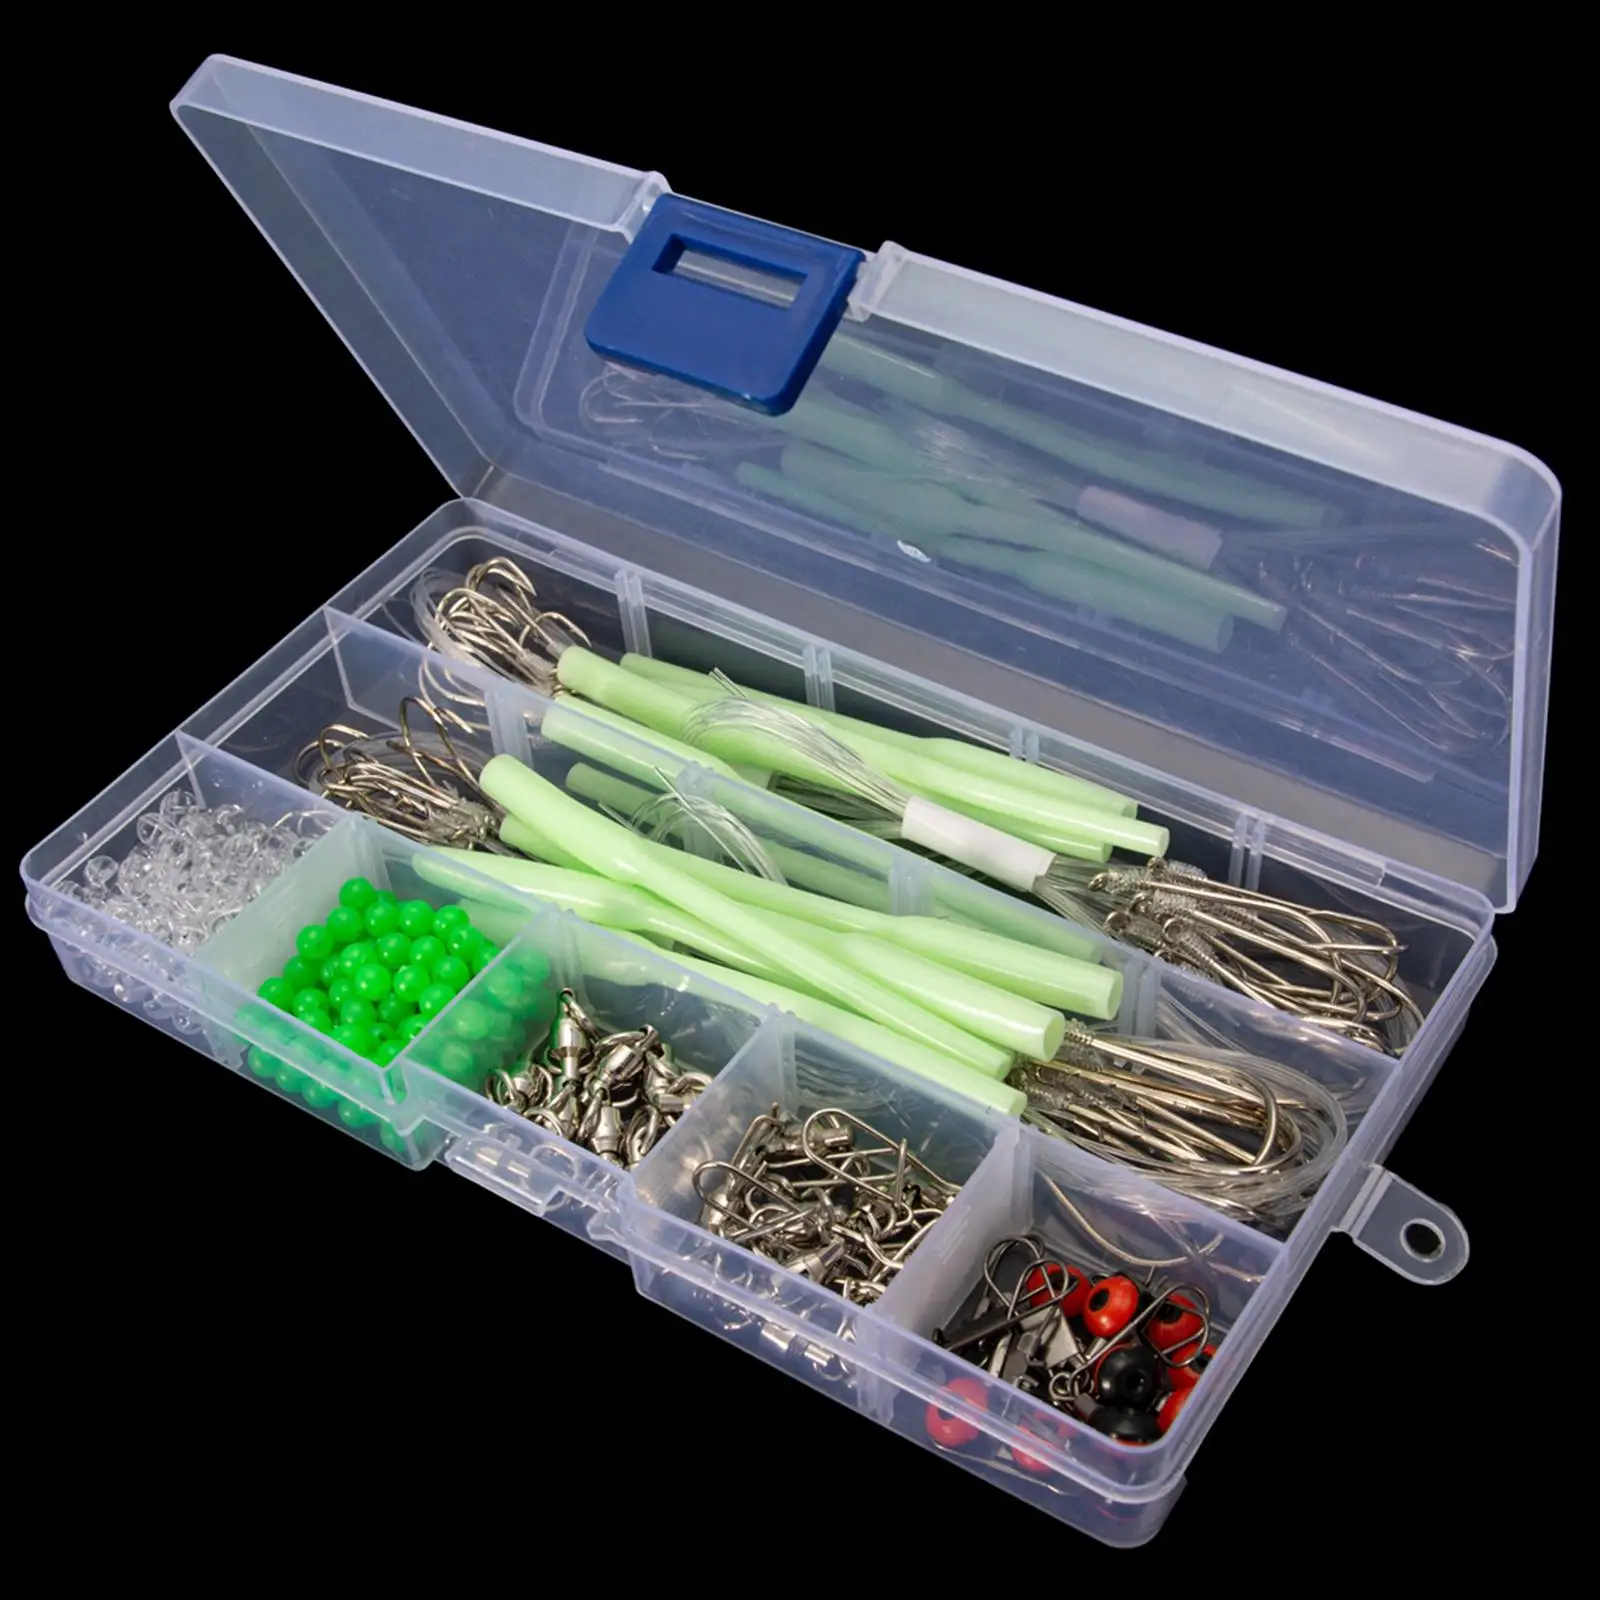 289x Fishing Tackle Box Kit with Box Thread Hook Set Bearing Swivel Fishing Accessories for Boat Fishing Freshwater